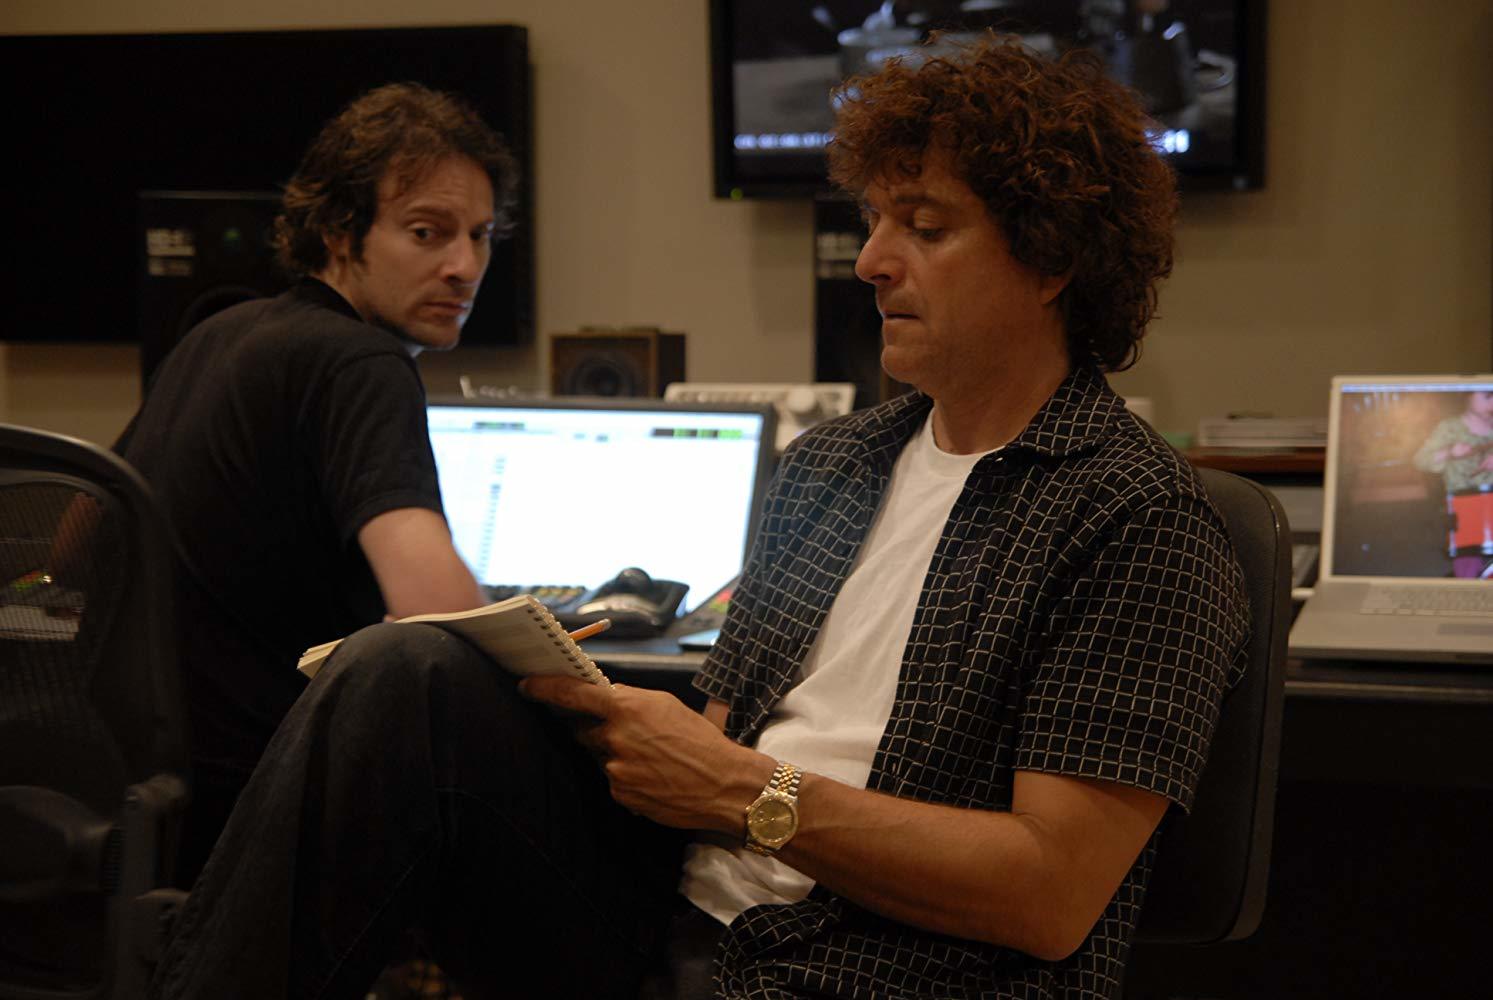 Recording engineer Clint Bennett with composer Anthony Marinelli working on the score to the feature film “Footsteps”.  Encino, CA, 2006